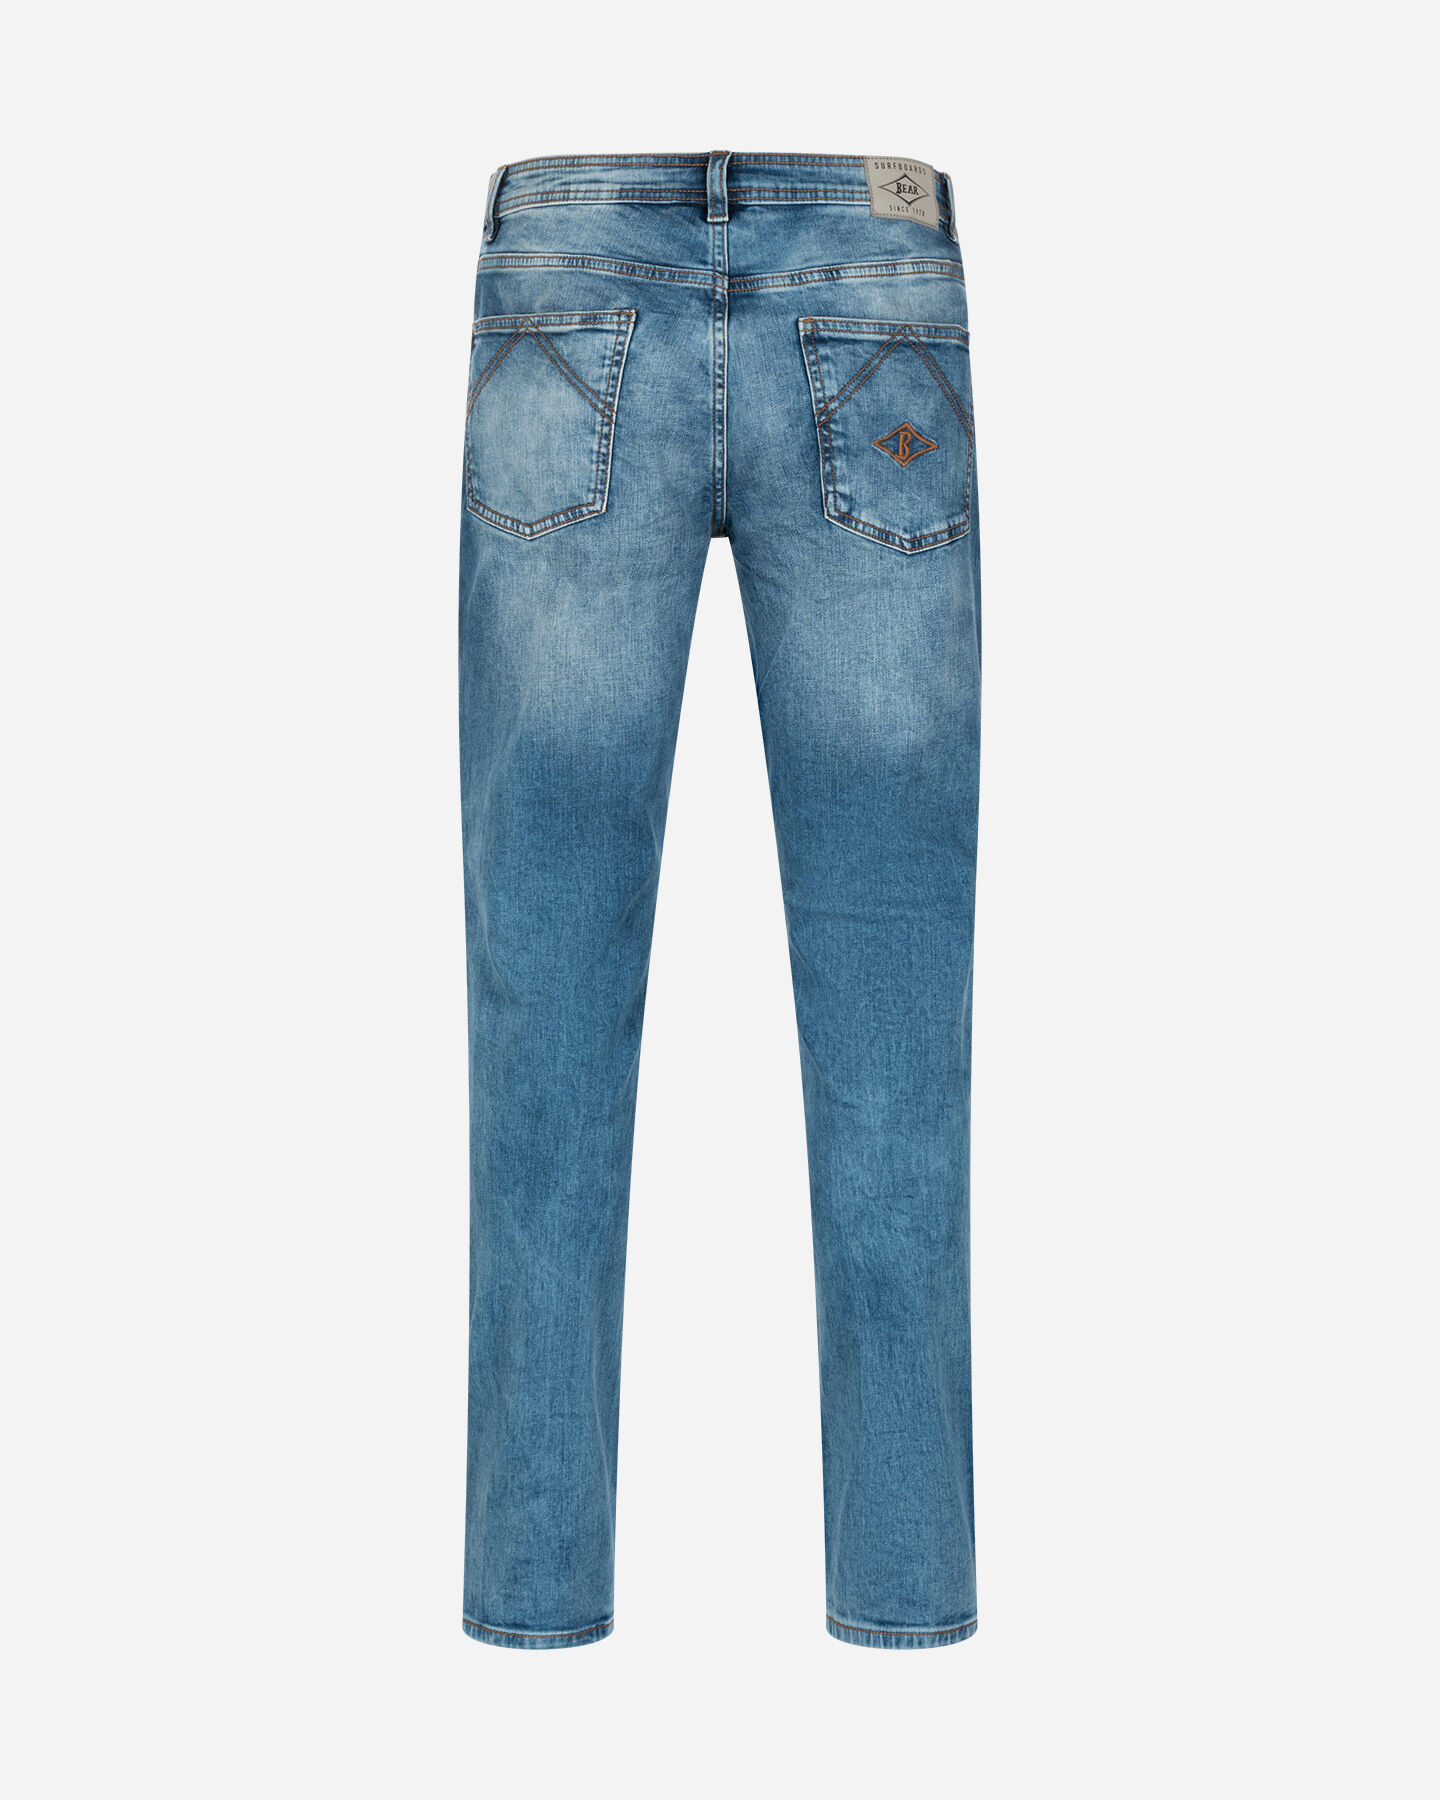  Jeans BEAR HERITAGE M S4131643|MD|44 scatto 5